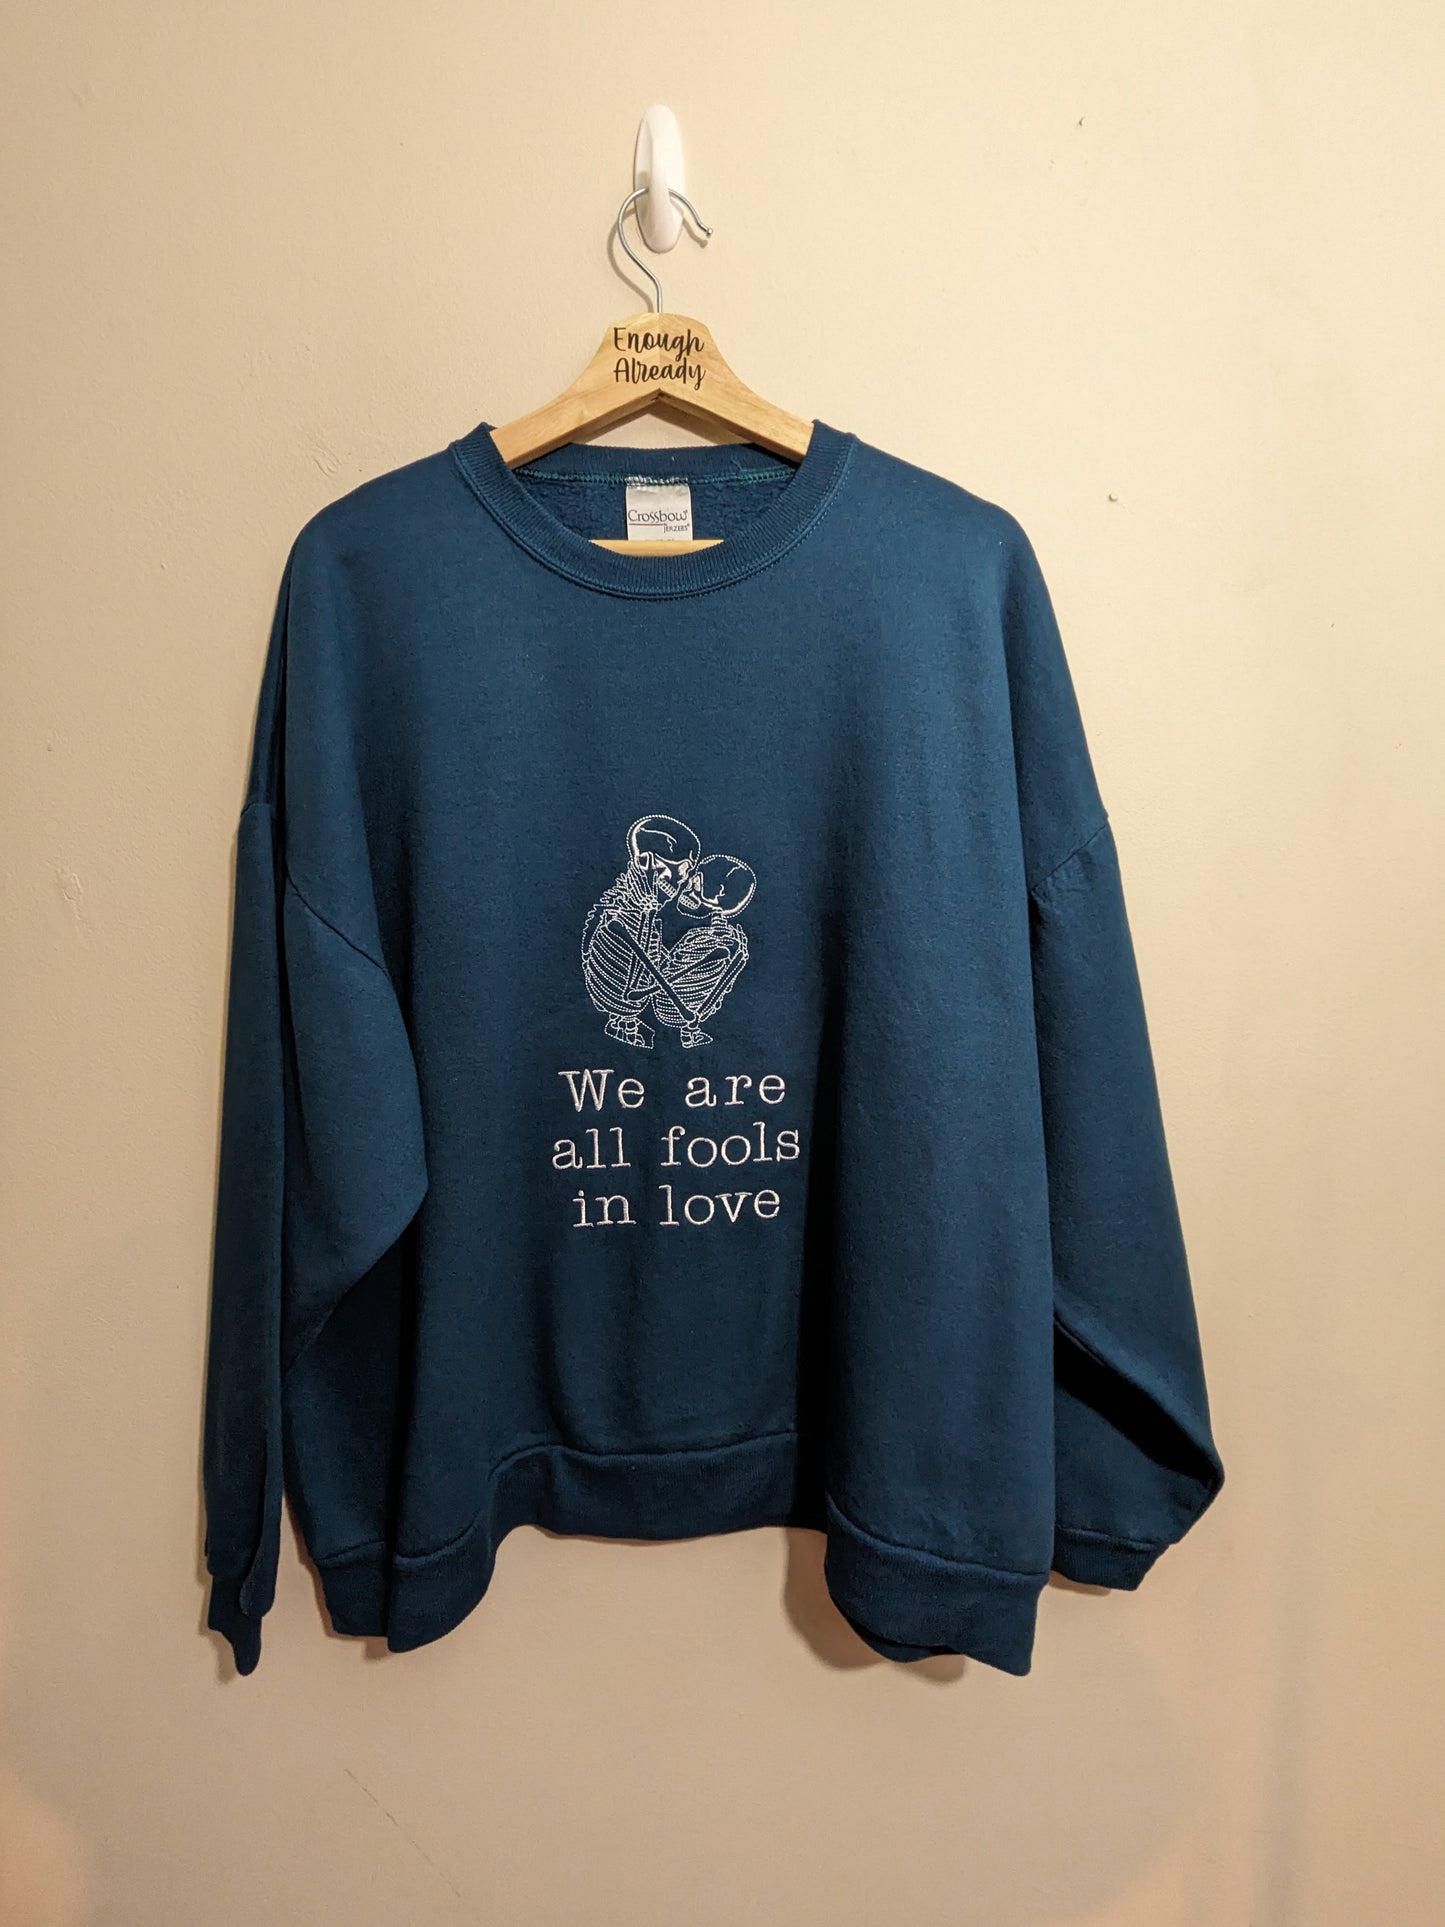 Size XL Navy Blue Reclaimed Sweatshirt - Embroidered Pride and Prejudice - Jane Austen Quote and Gothic Skeleton Illustration